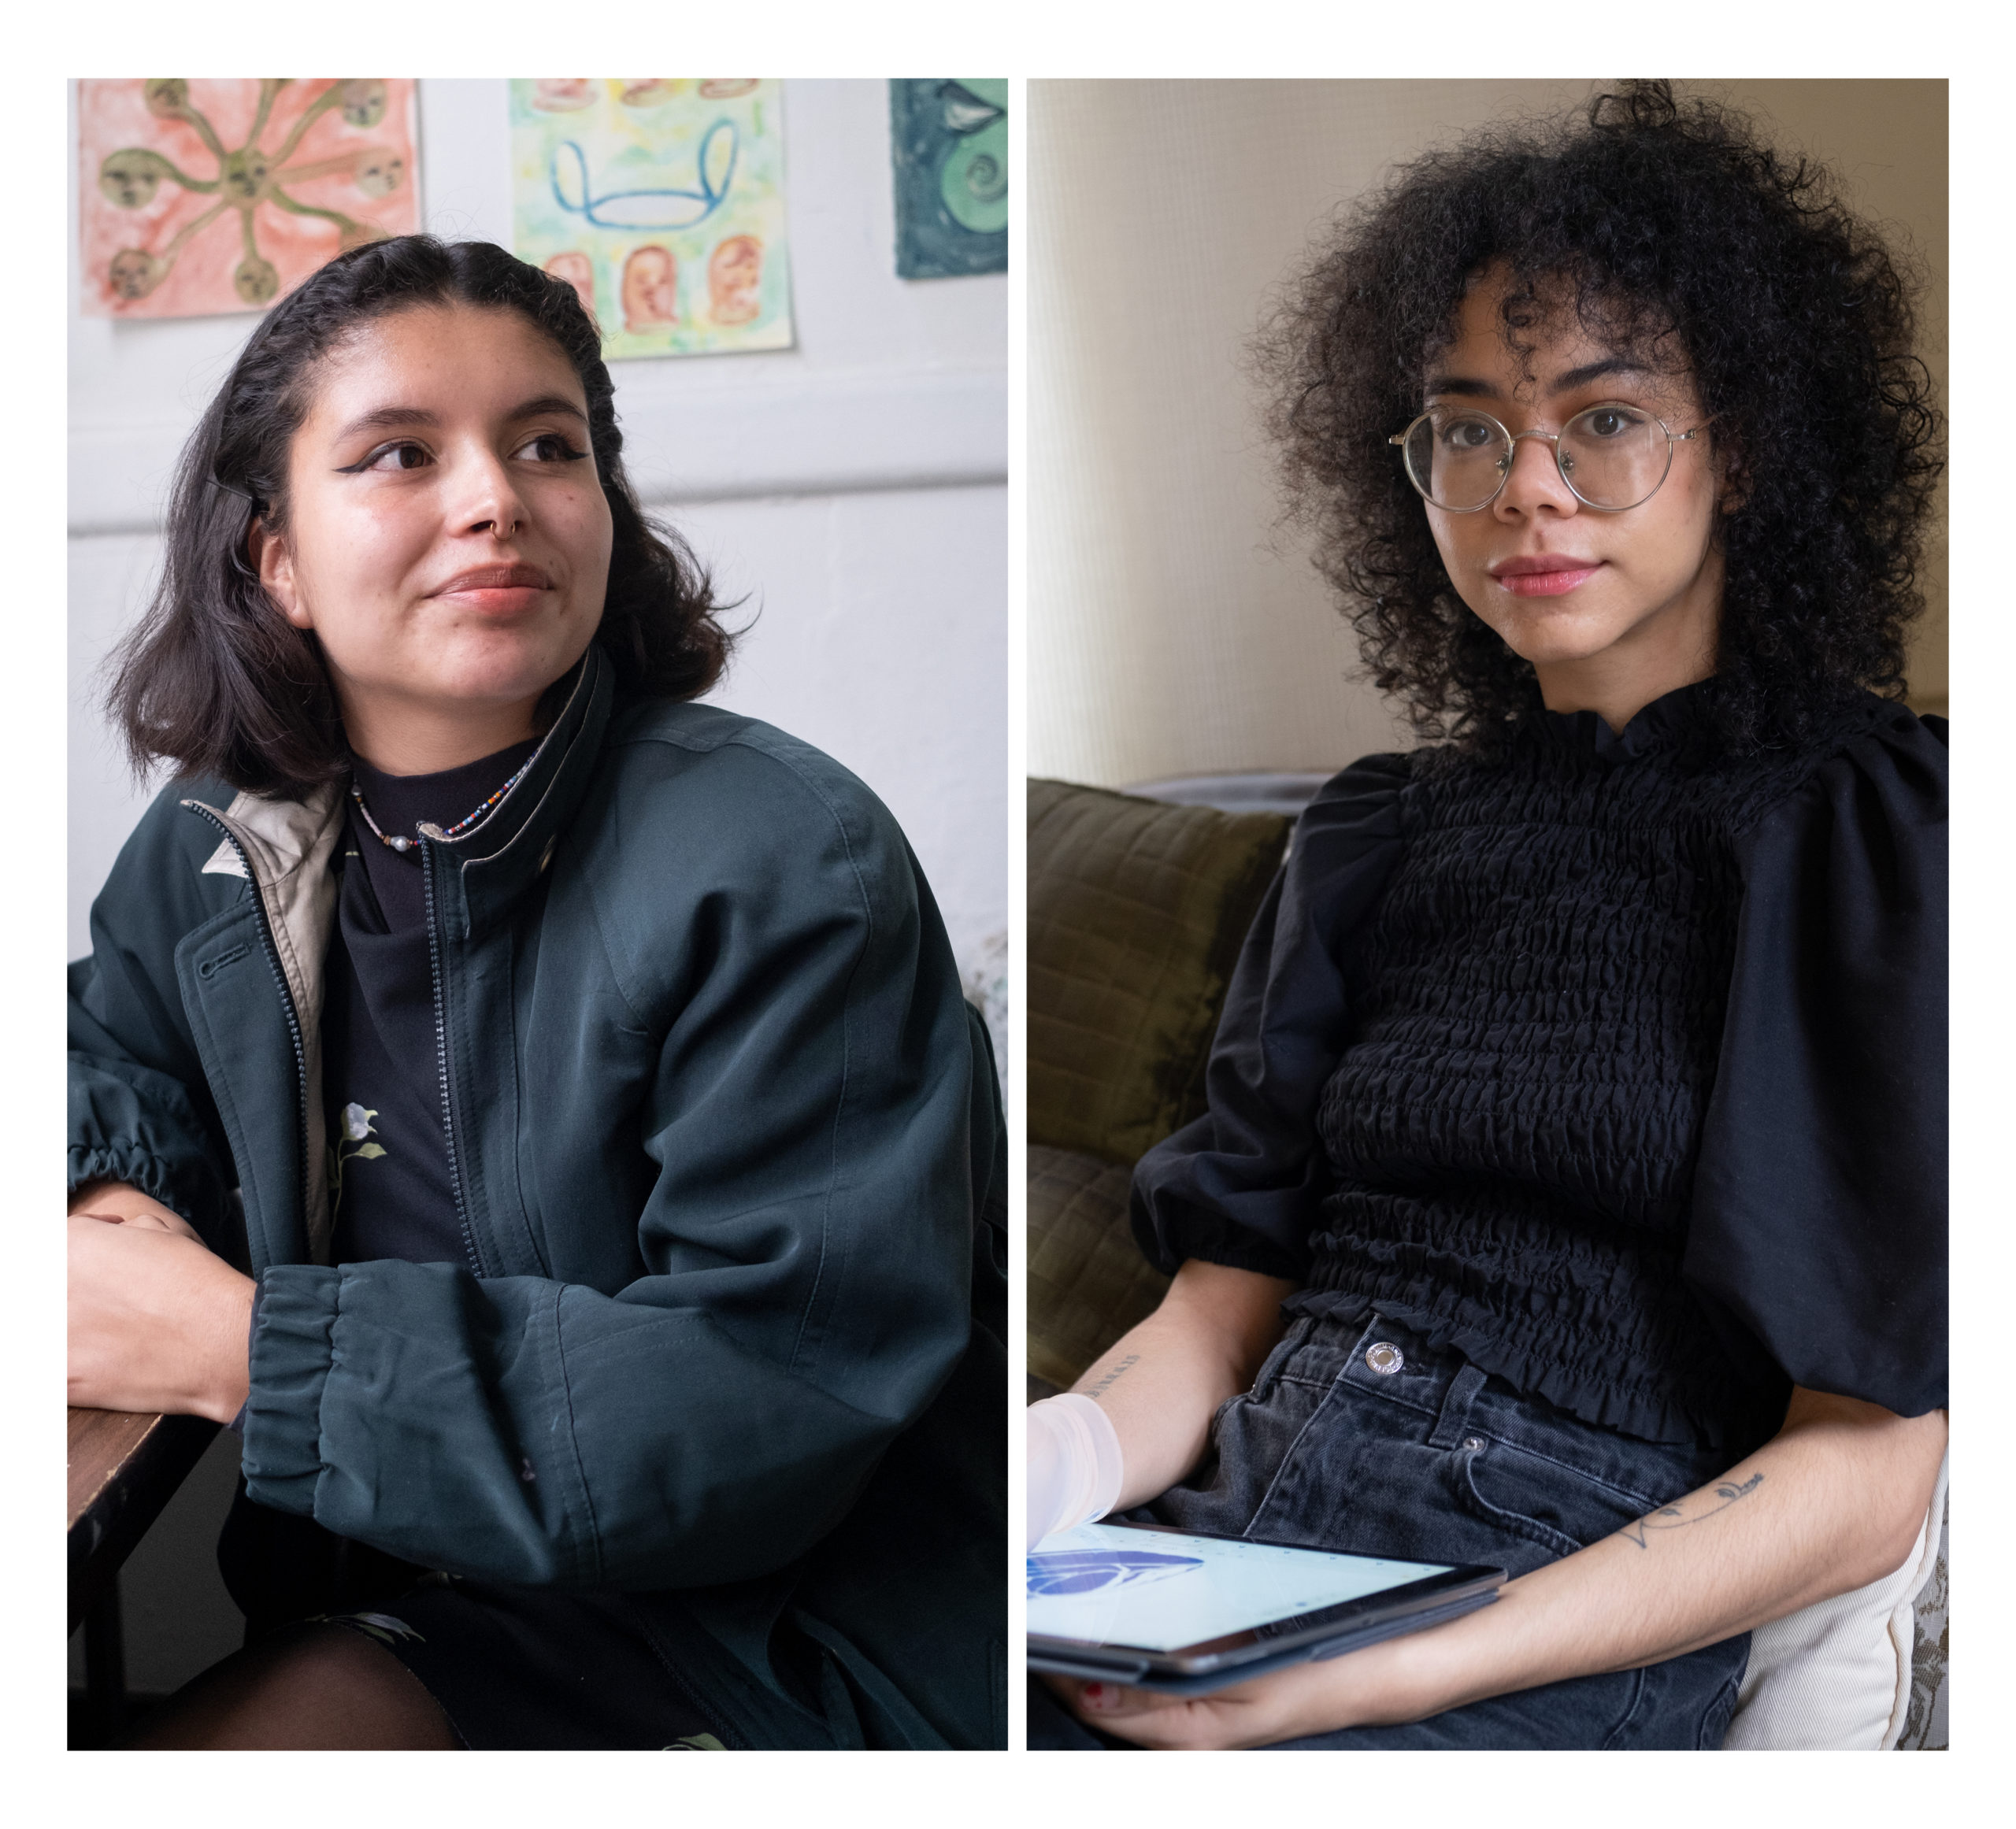 Two side by side photos, left is Laura Medina looking up to the right, and right image is Azali Ansar Muhammad sitting on a couch and looking at the camera.